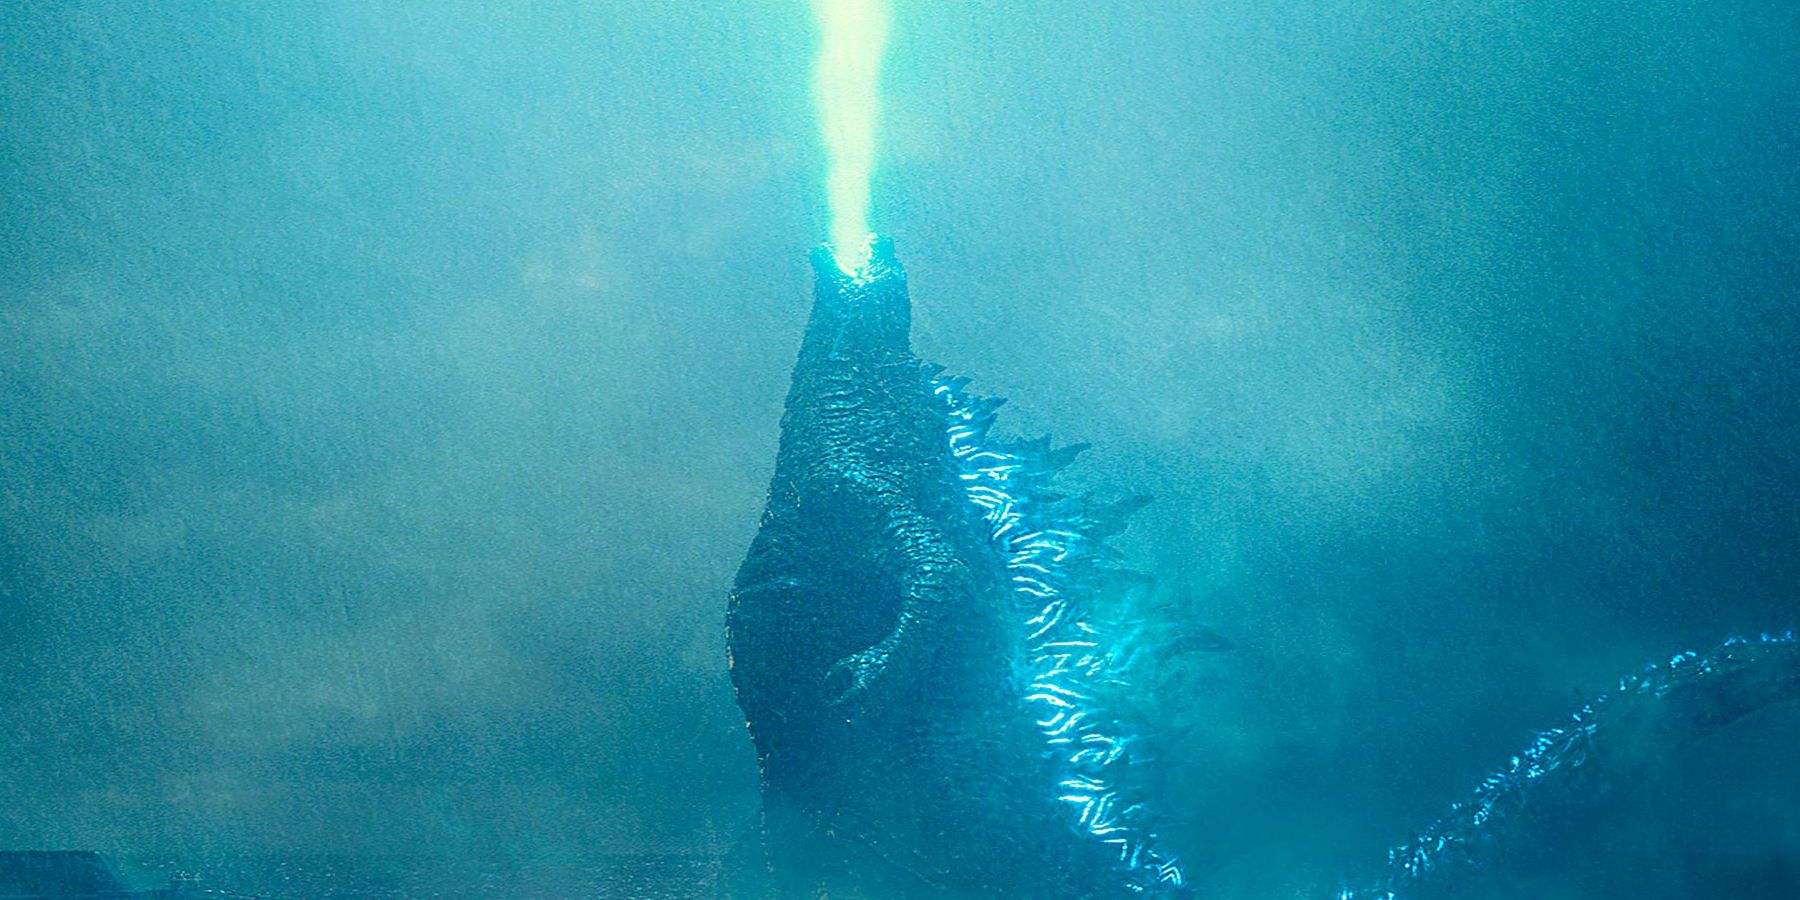 Godzilla channels his atomic breathe into the sky